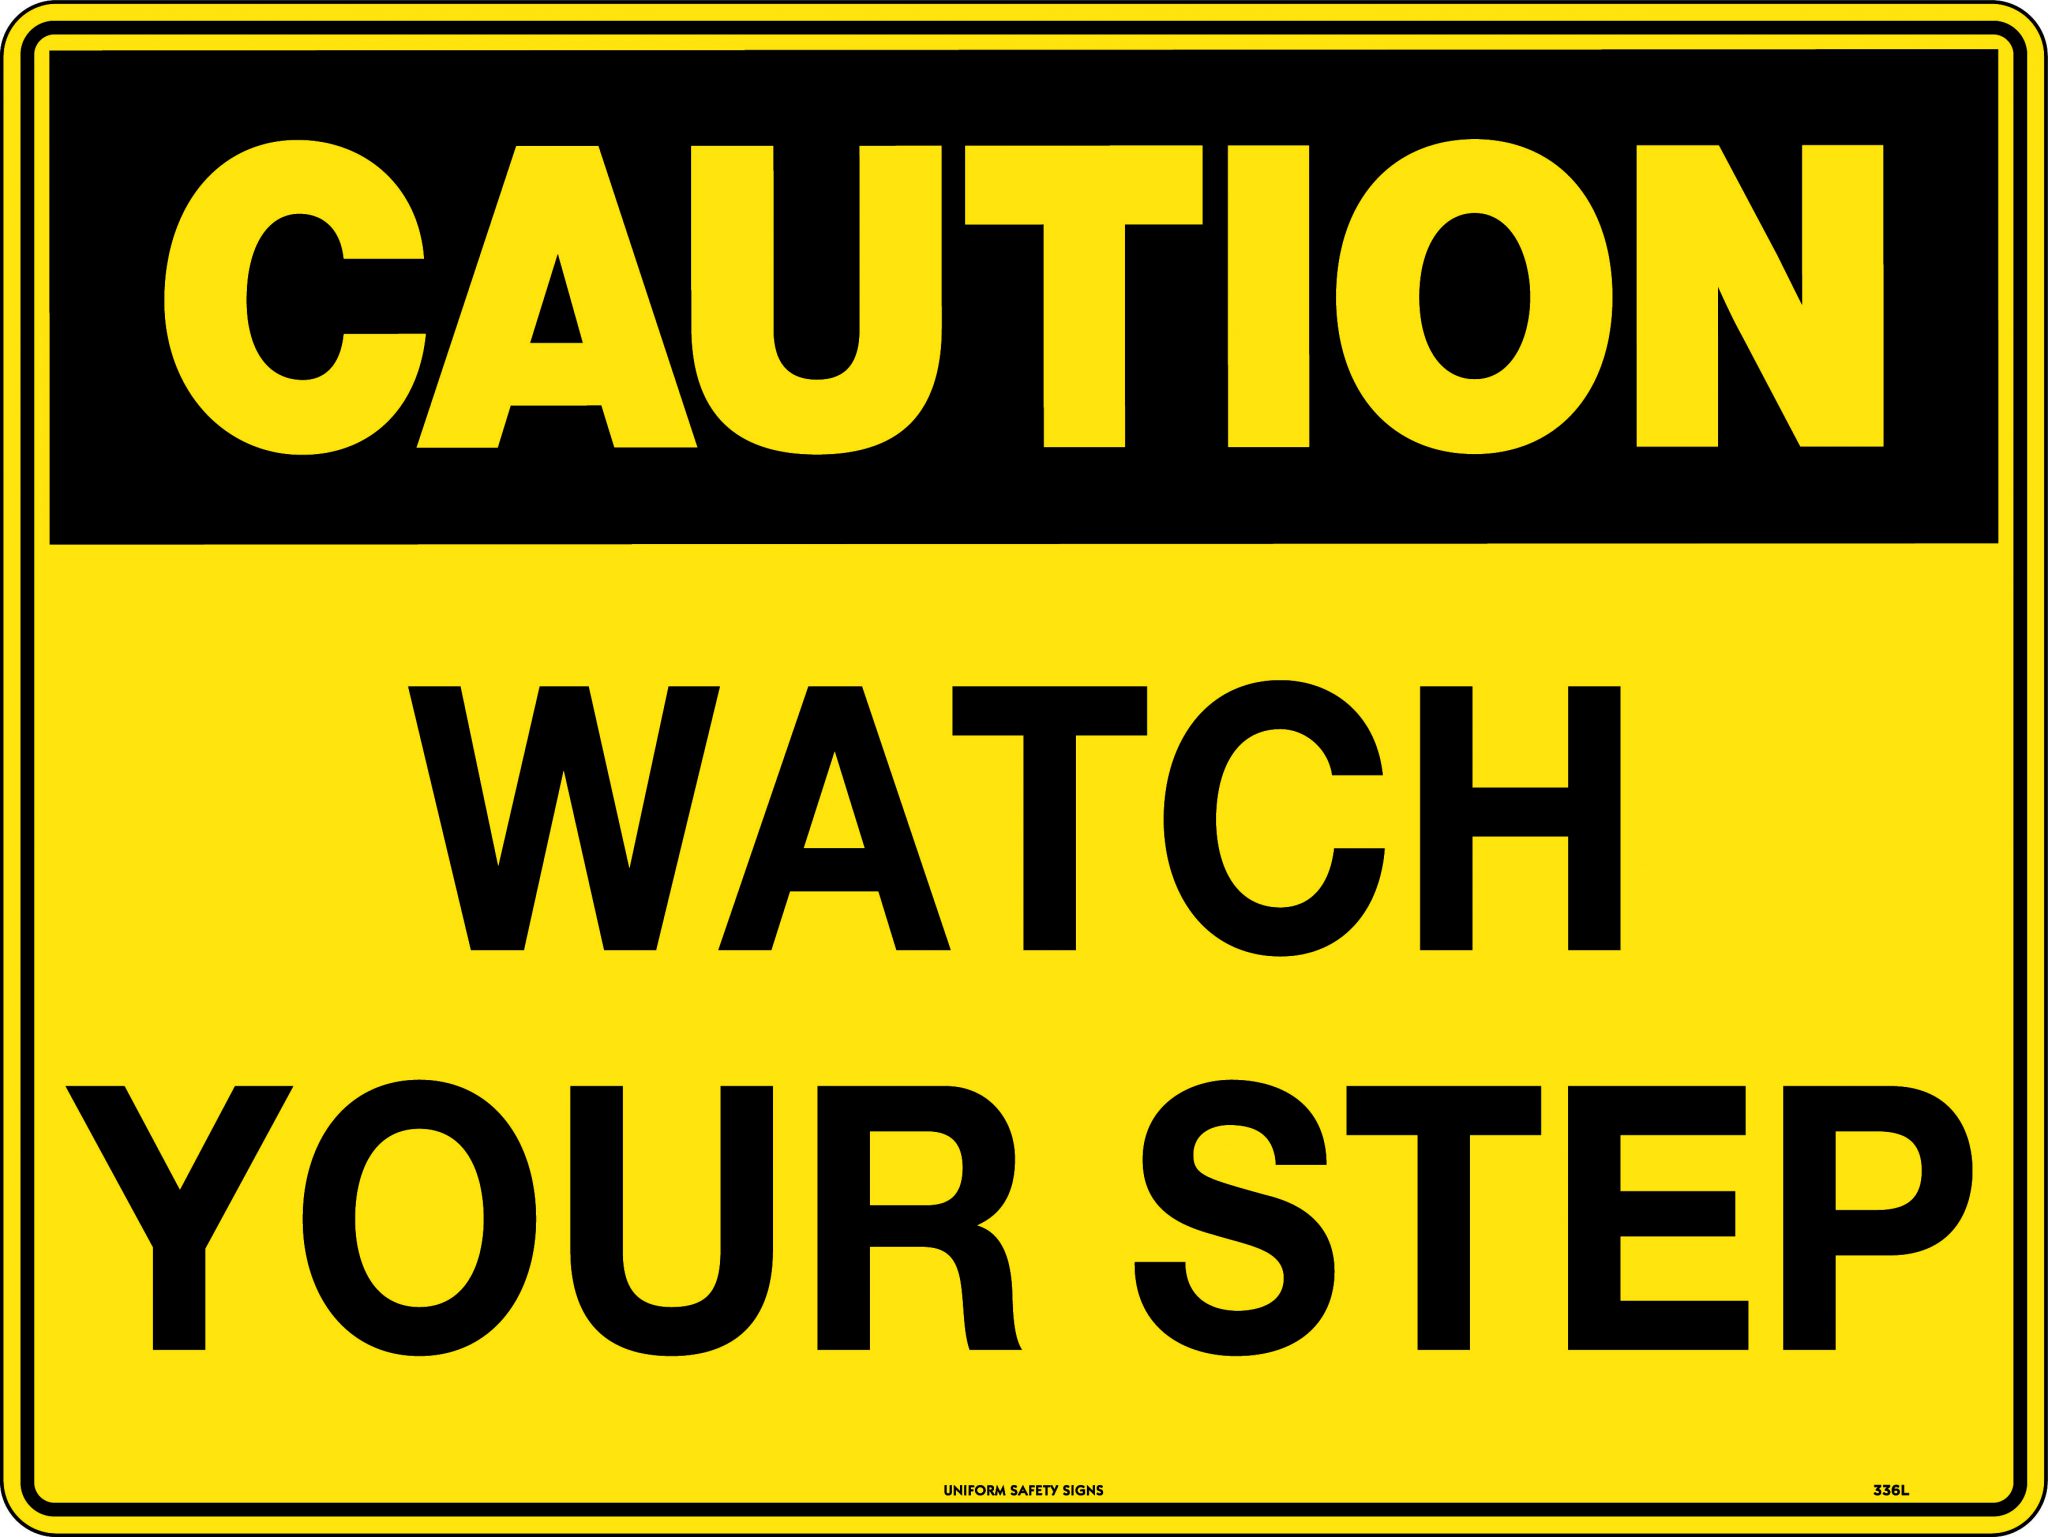 Caution Watch Your Step Uniform Safety Signs